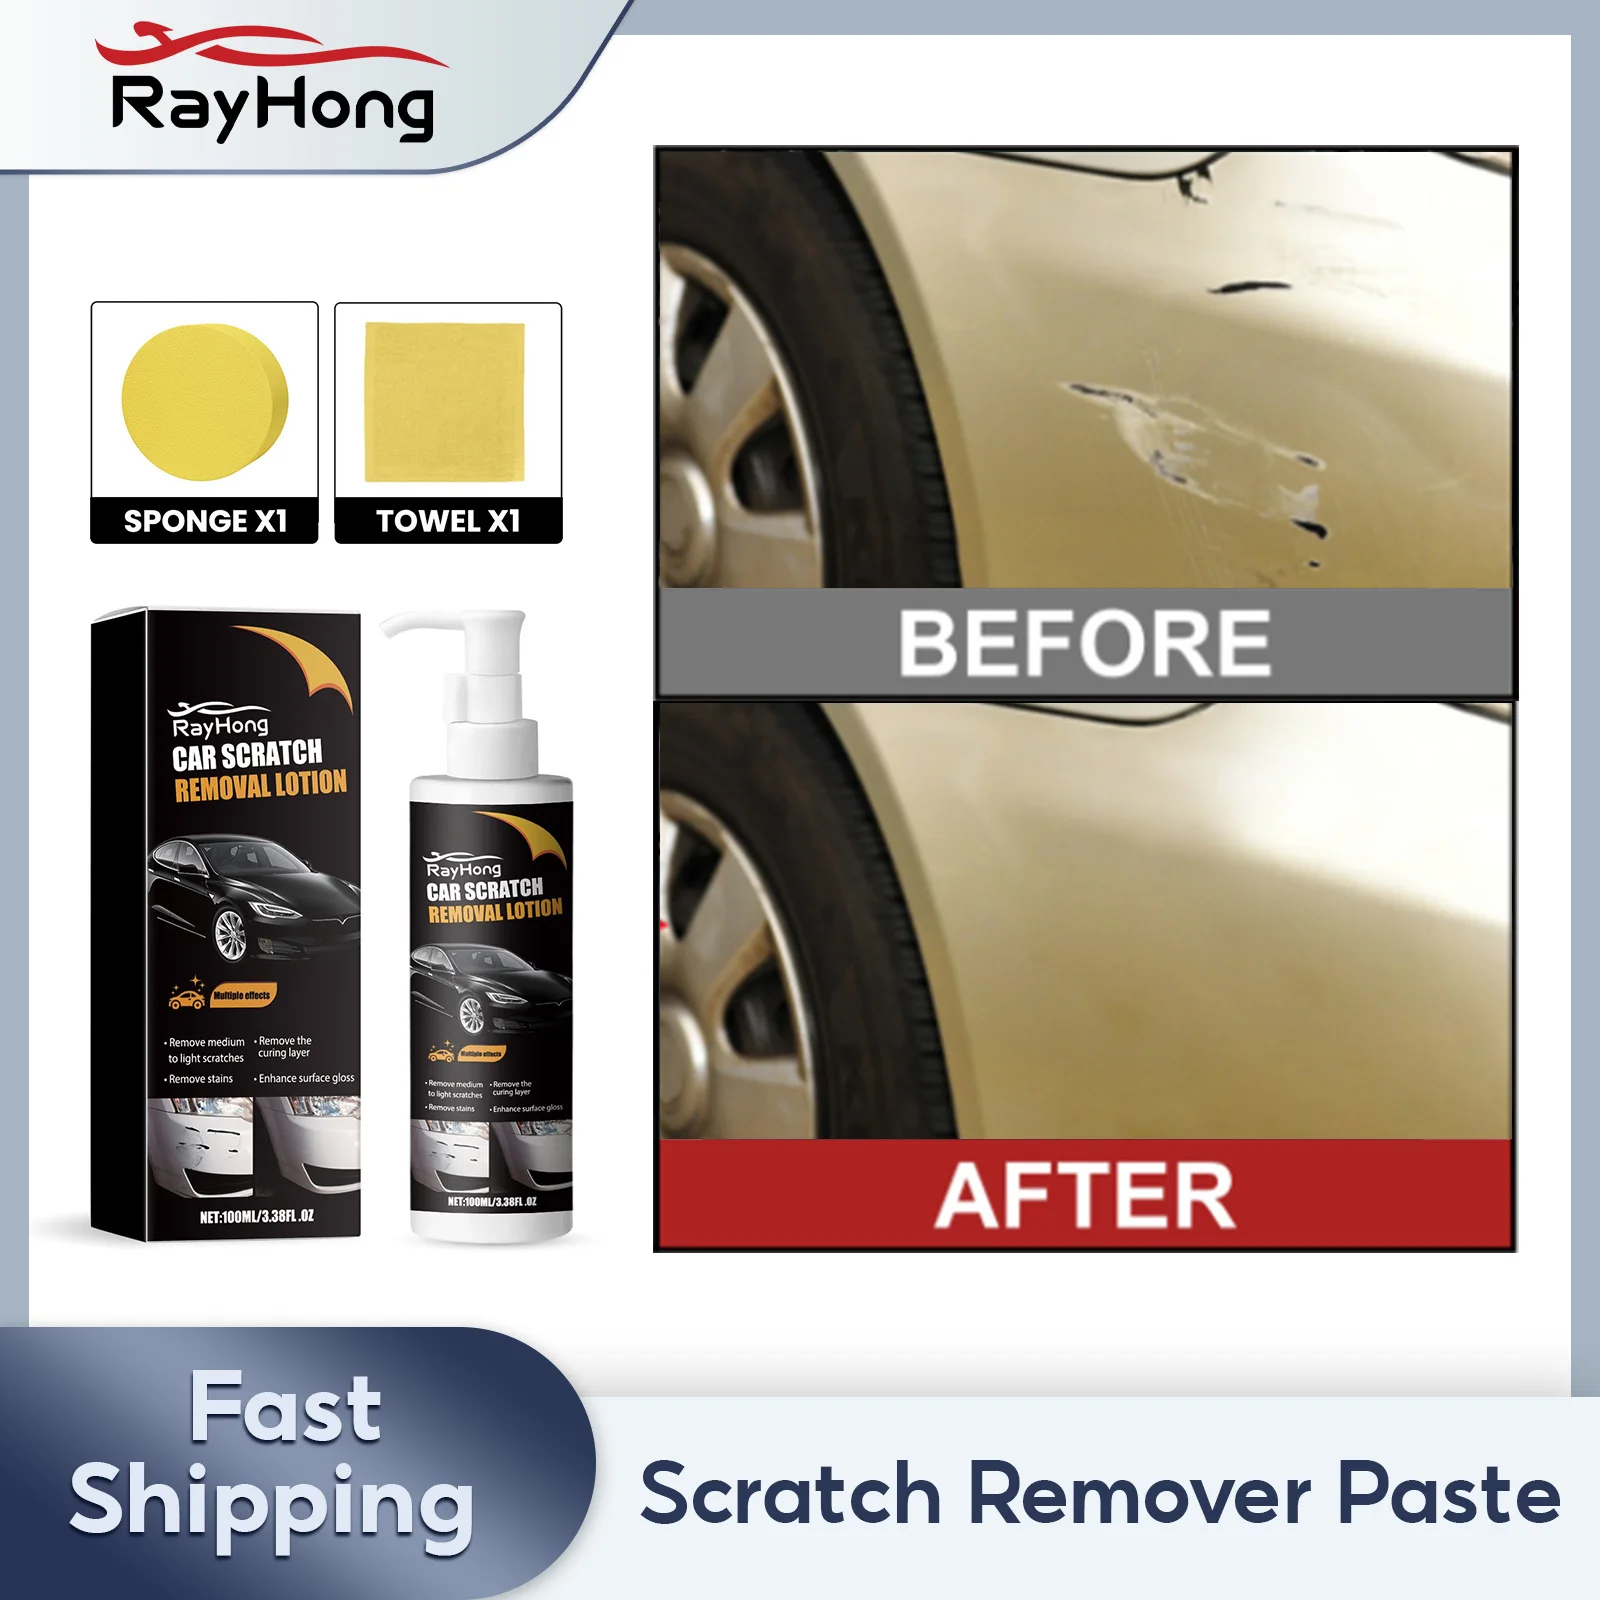 

Scratch Remover Paste Swirl Remover Scratches Repair Polishing Cream Body Grinding Compound Paint Care Tools Anti Scratch Agent